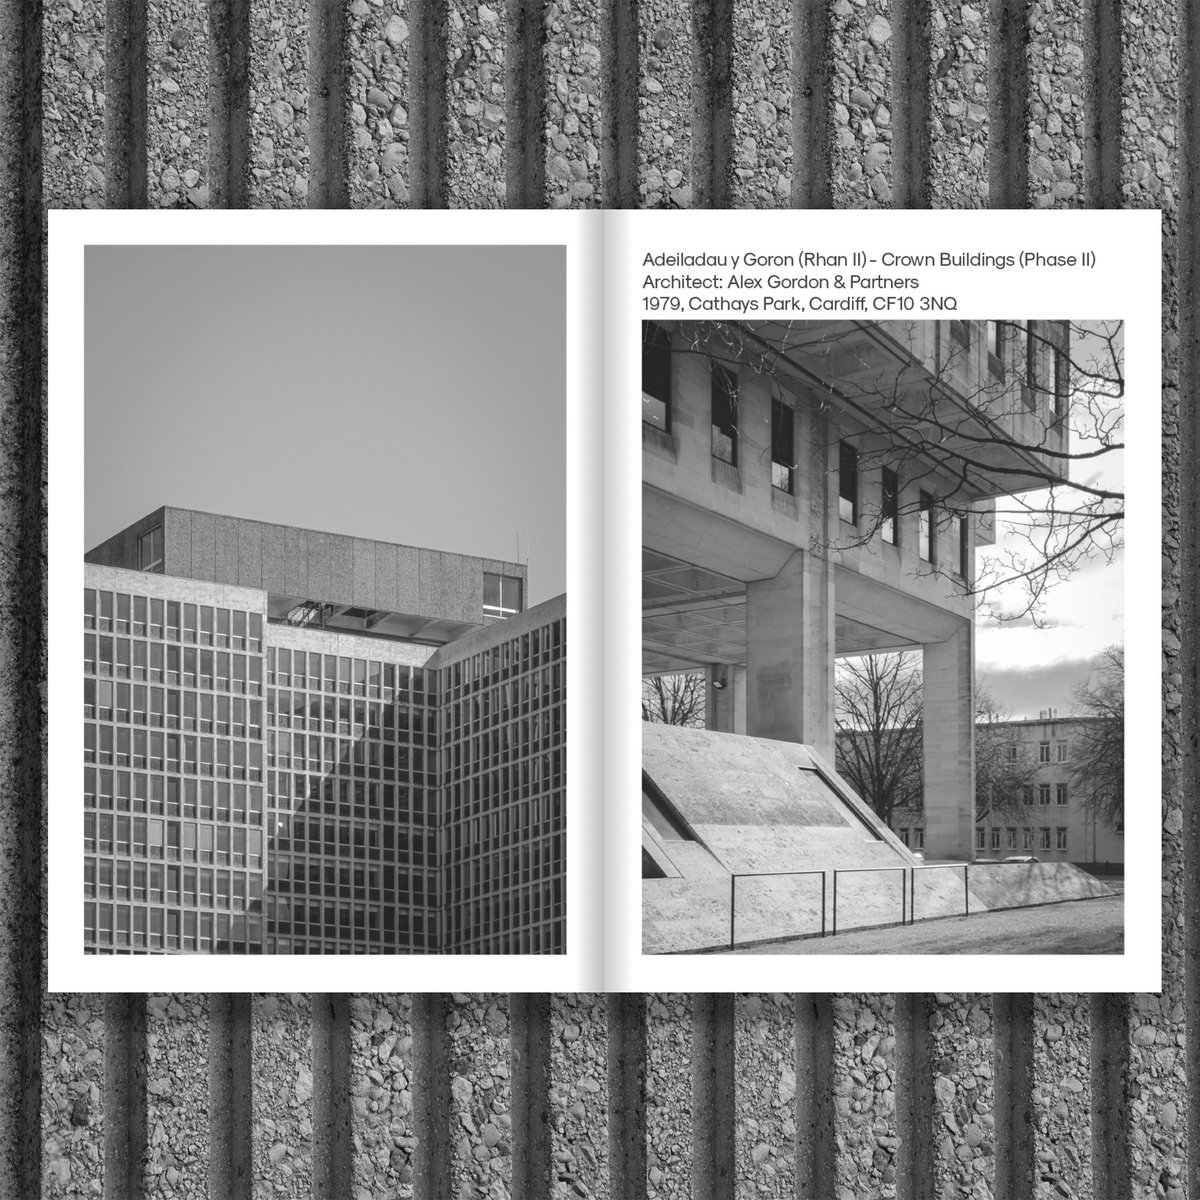 A little photozine I've been working on for a few months with Uhmzines. Highlighting the unsung Brutal heroes of Wales. Available online at etsy.com/uk/shop/Uhmzin…

#brutalism #brutalwales